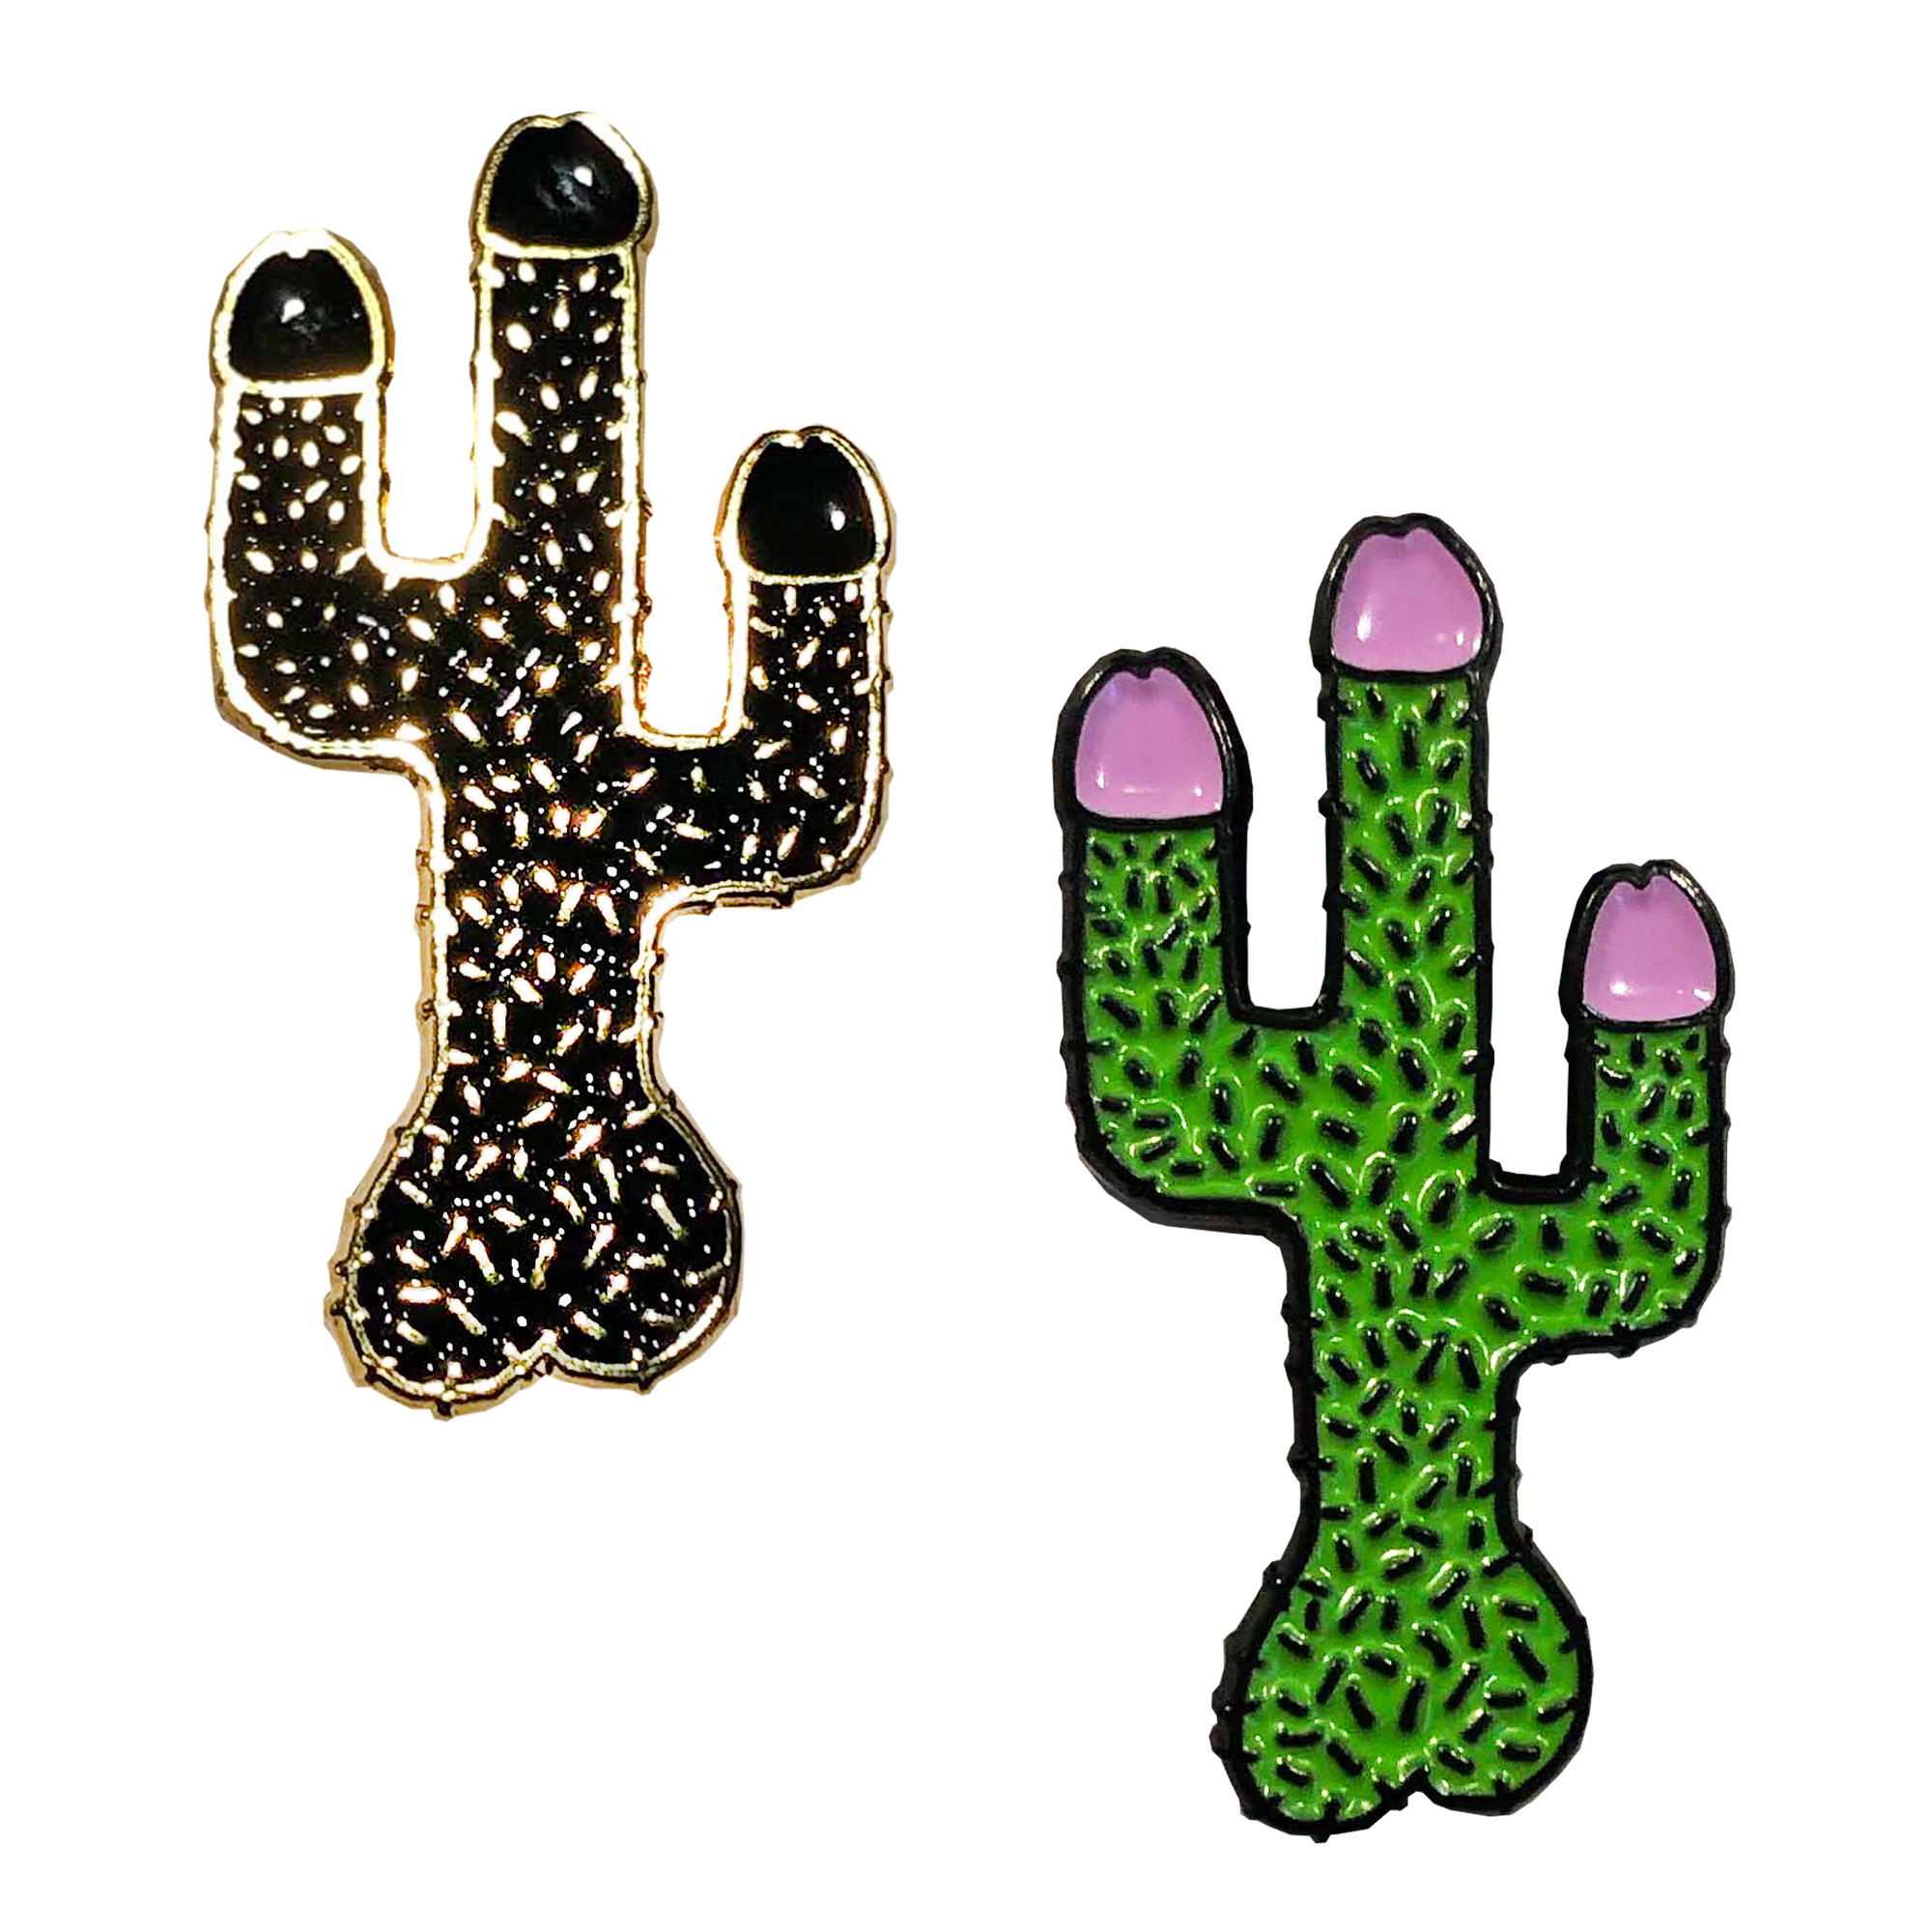 Funny Cactus Flair Pack